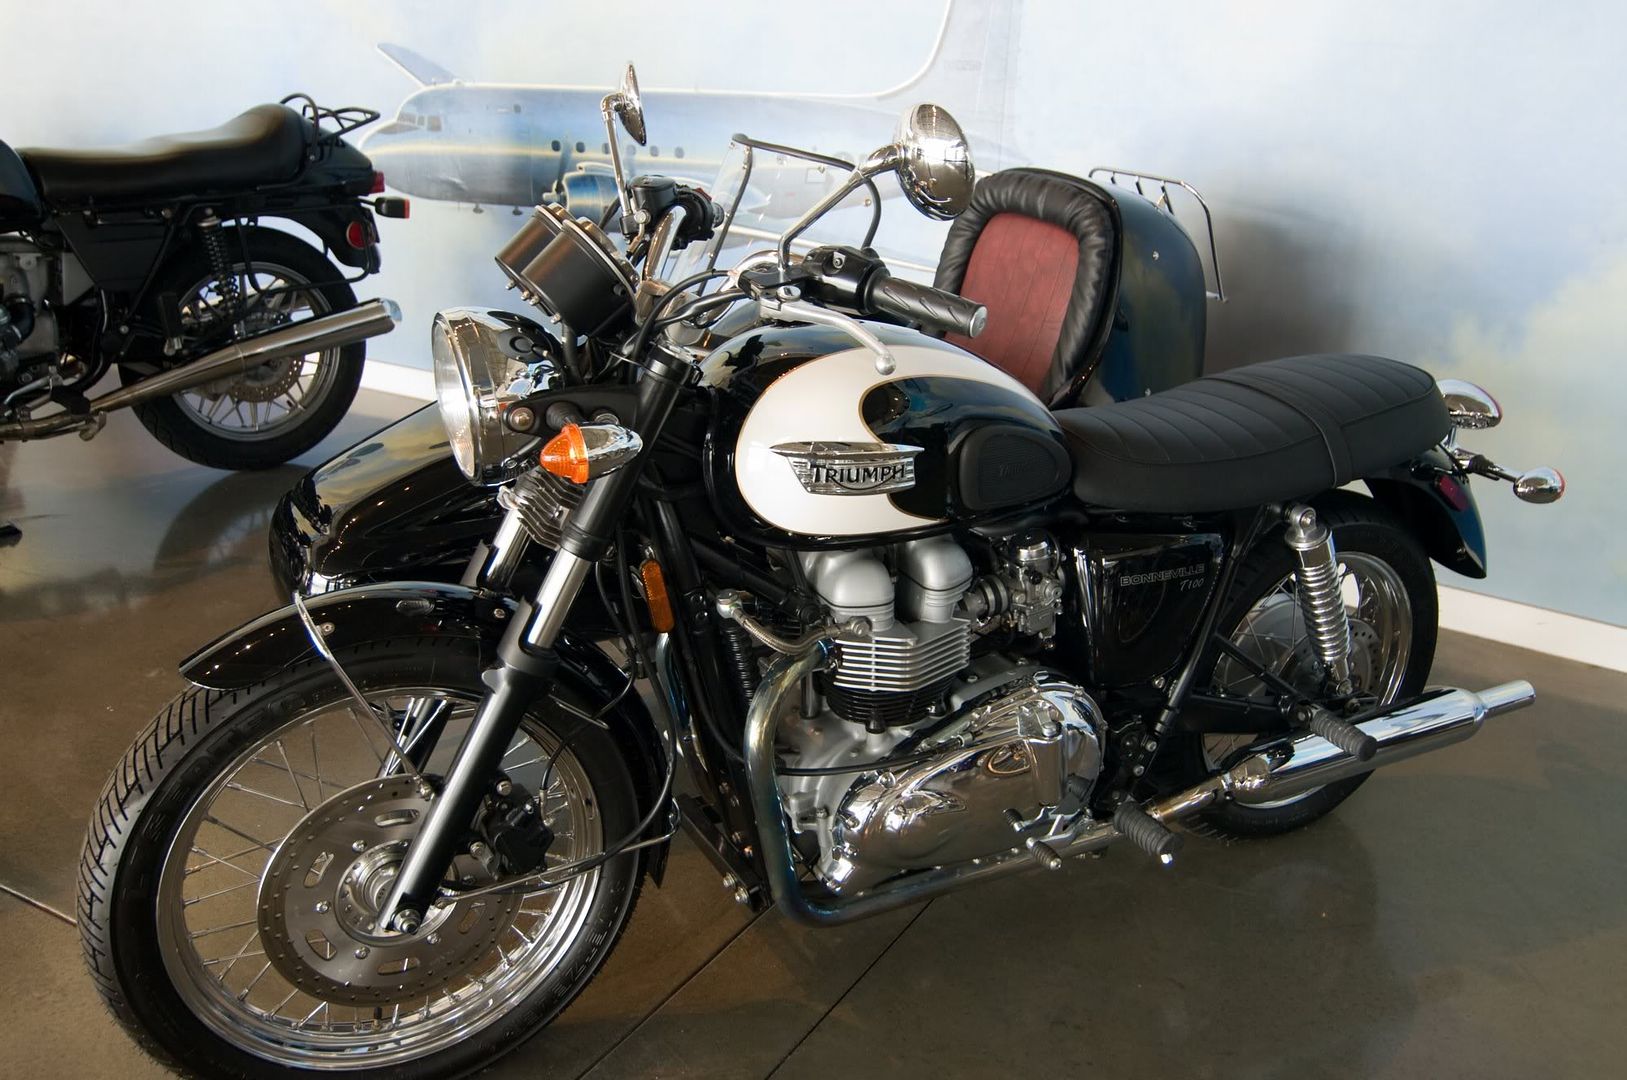 Vintage and Celebrity Motorcycles in Ronald Reagan Library and